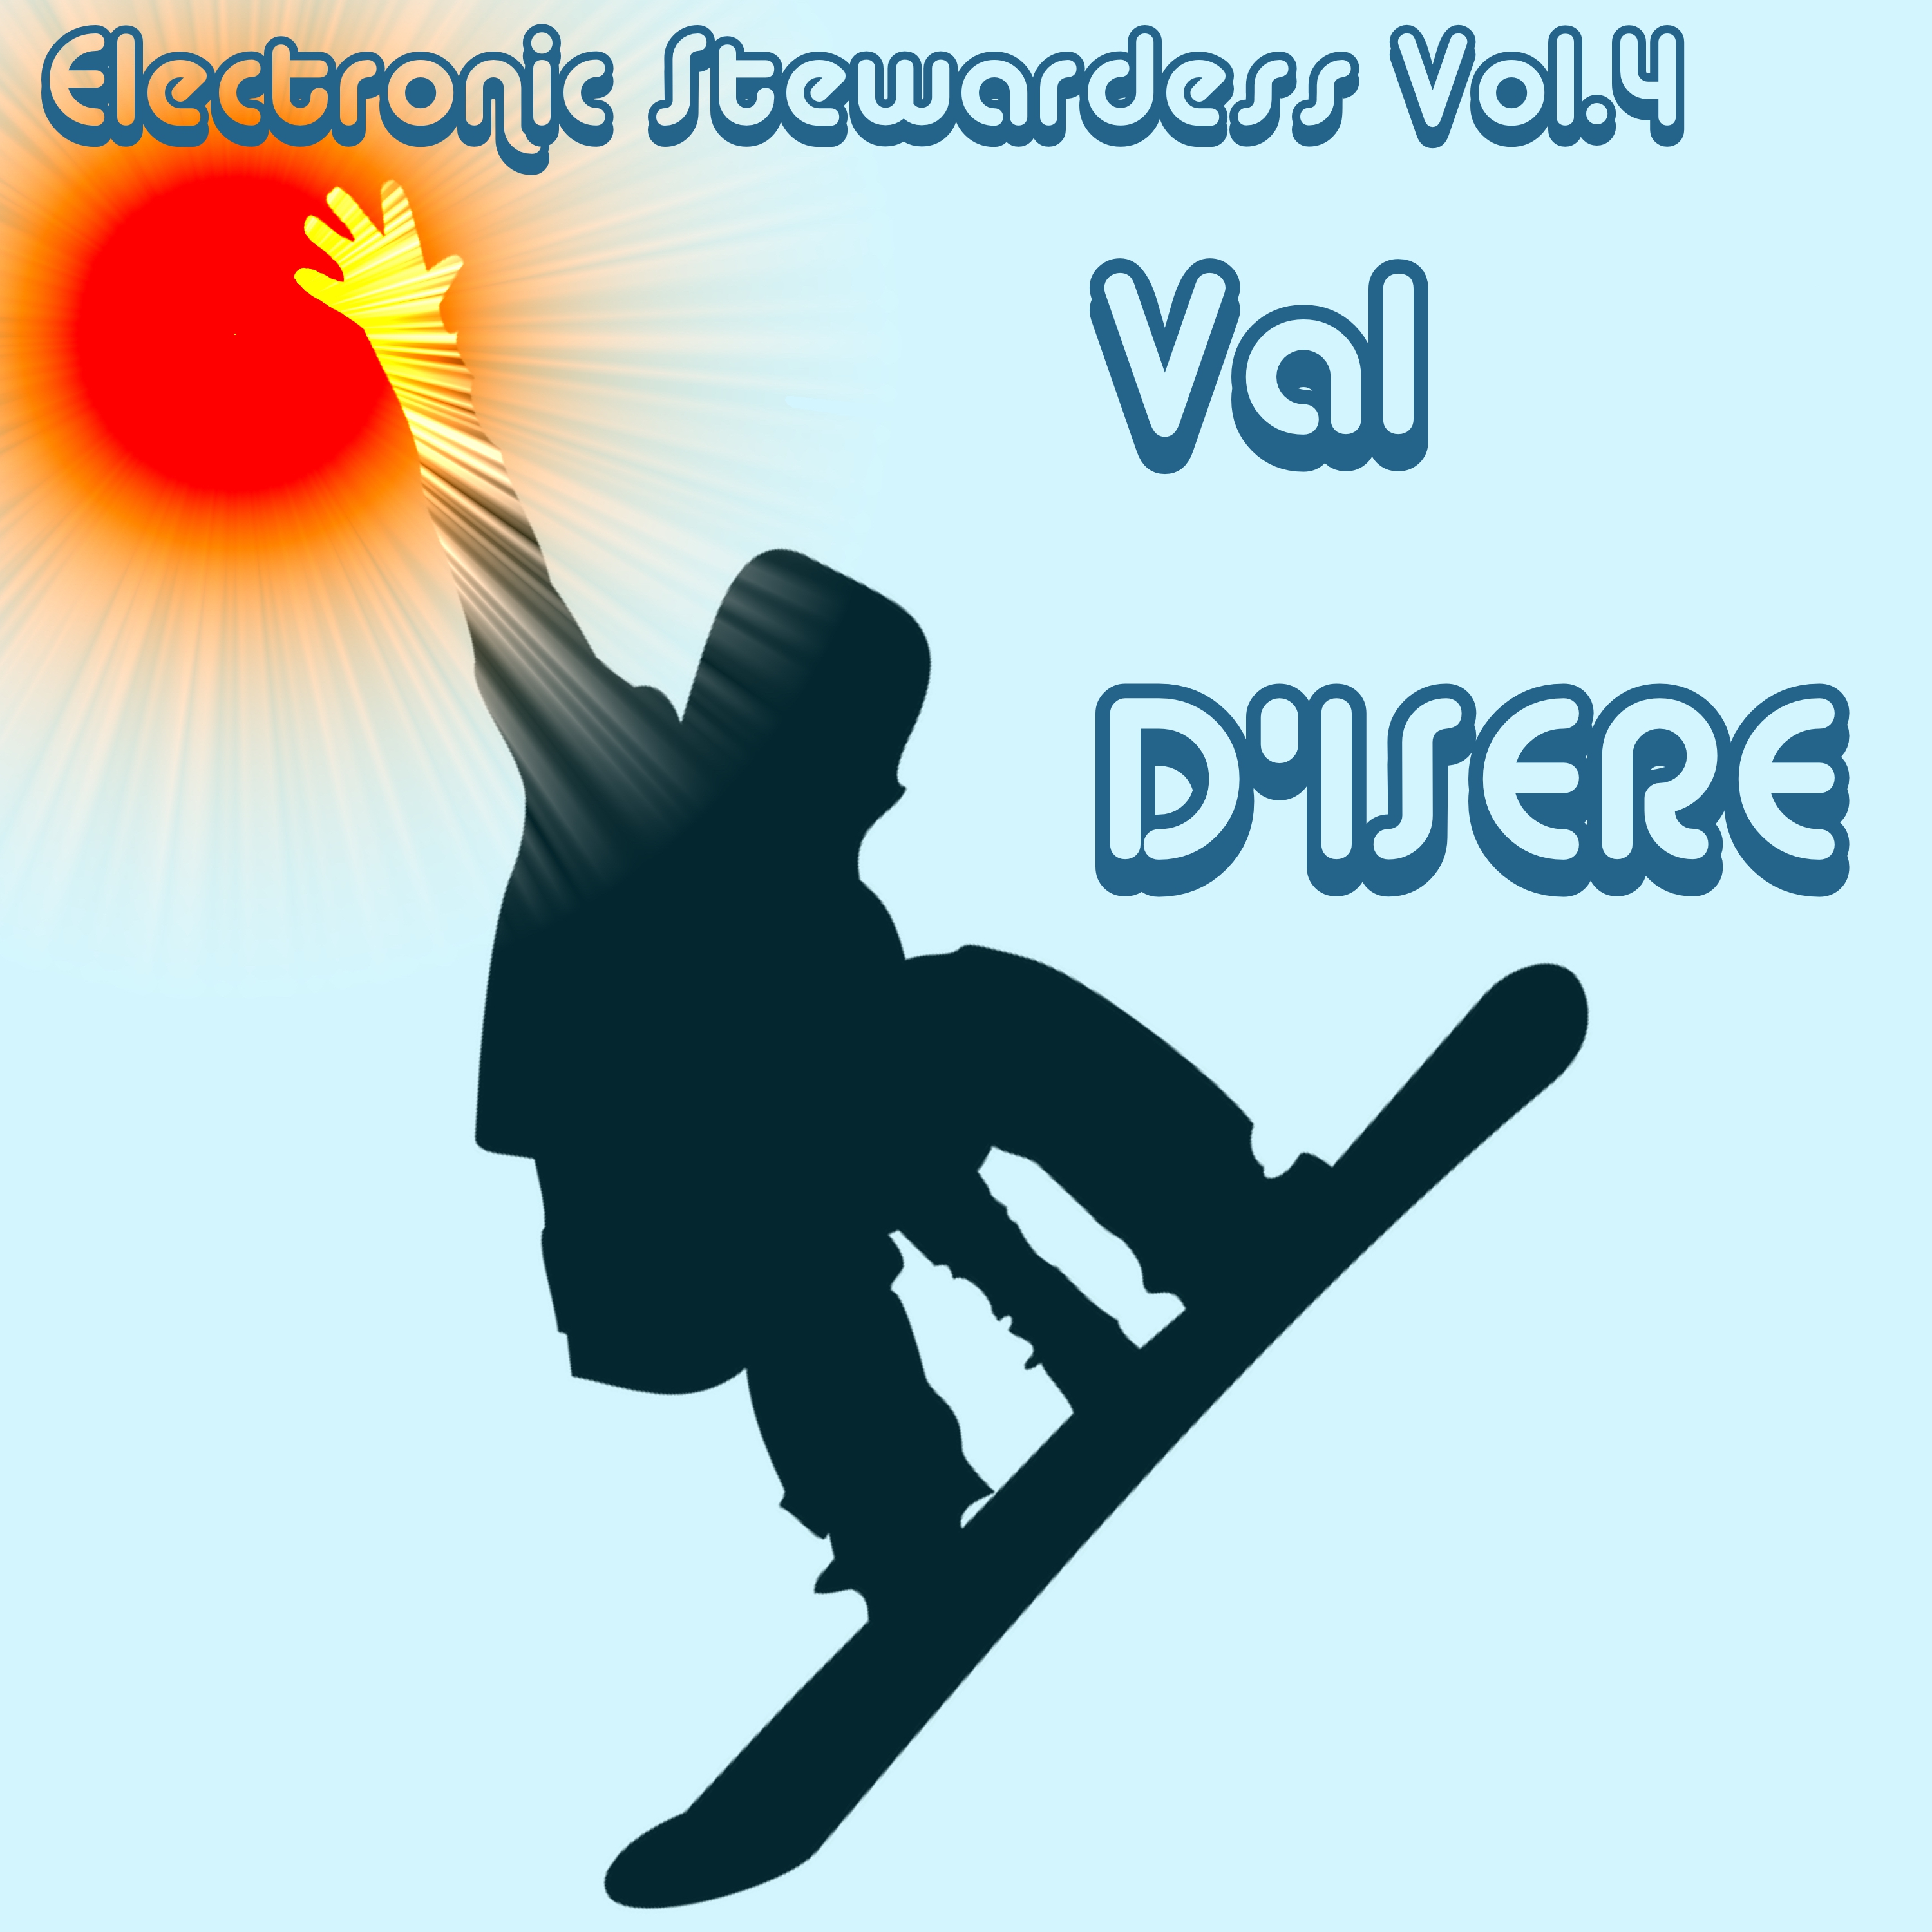 Electronic Stewardess - Val D'Isere, Vol. 4